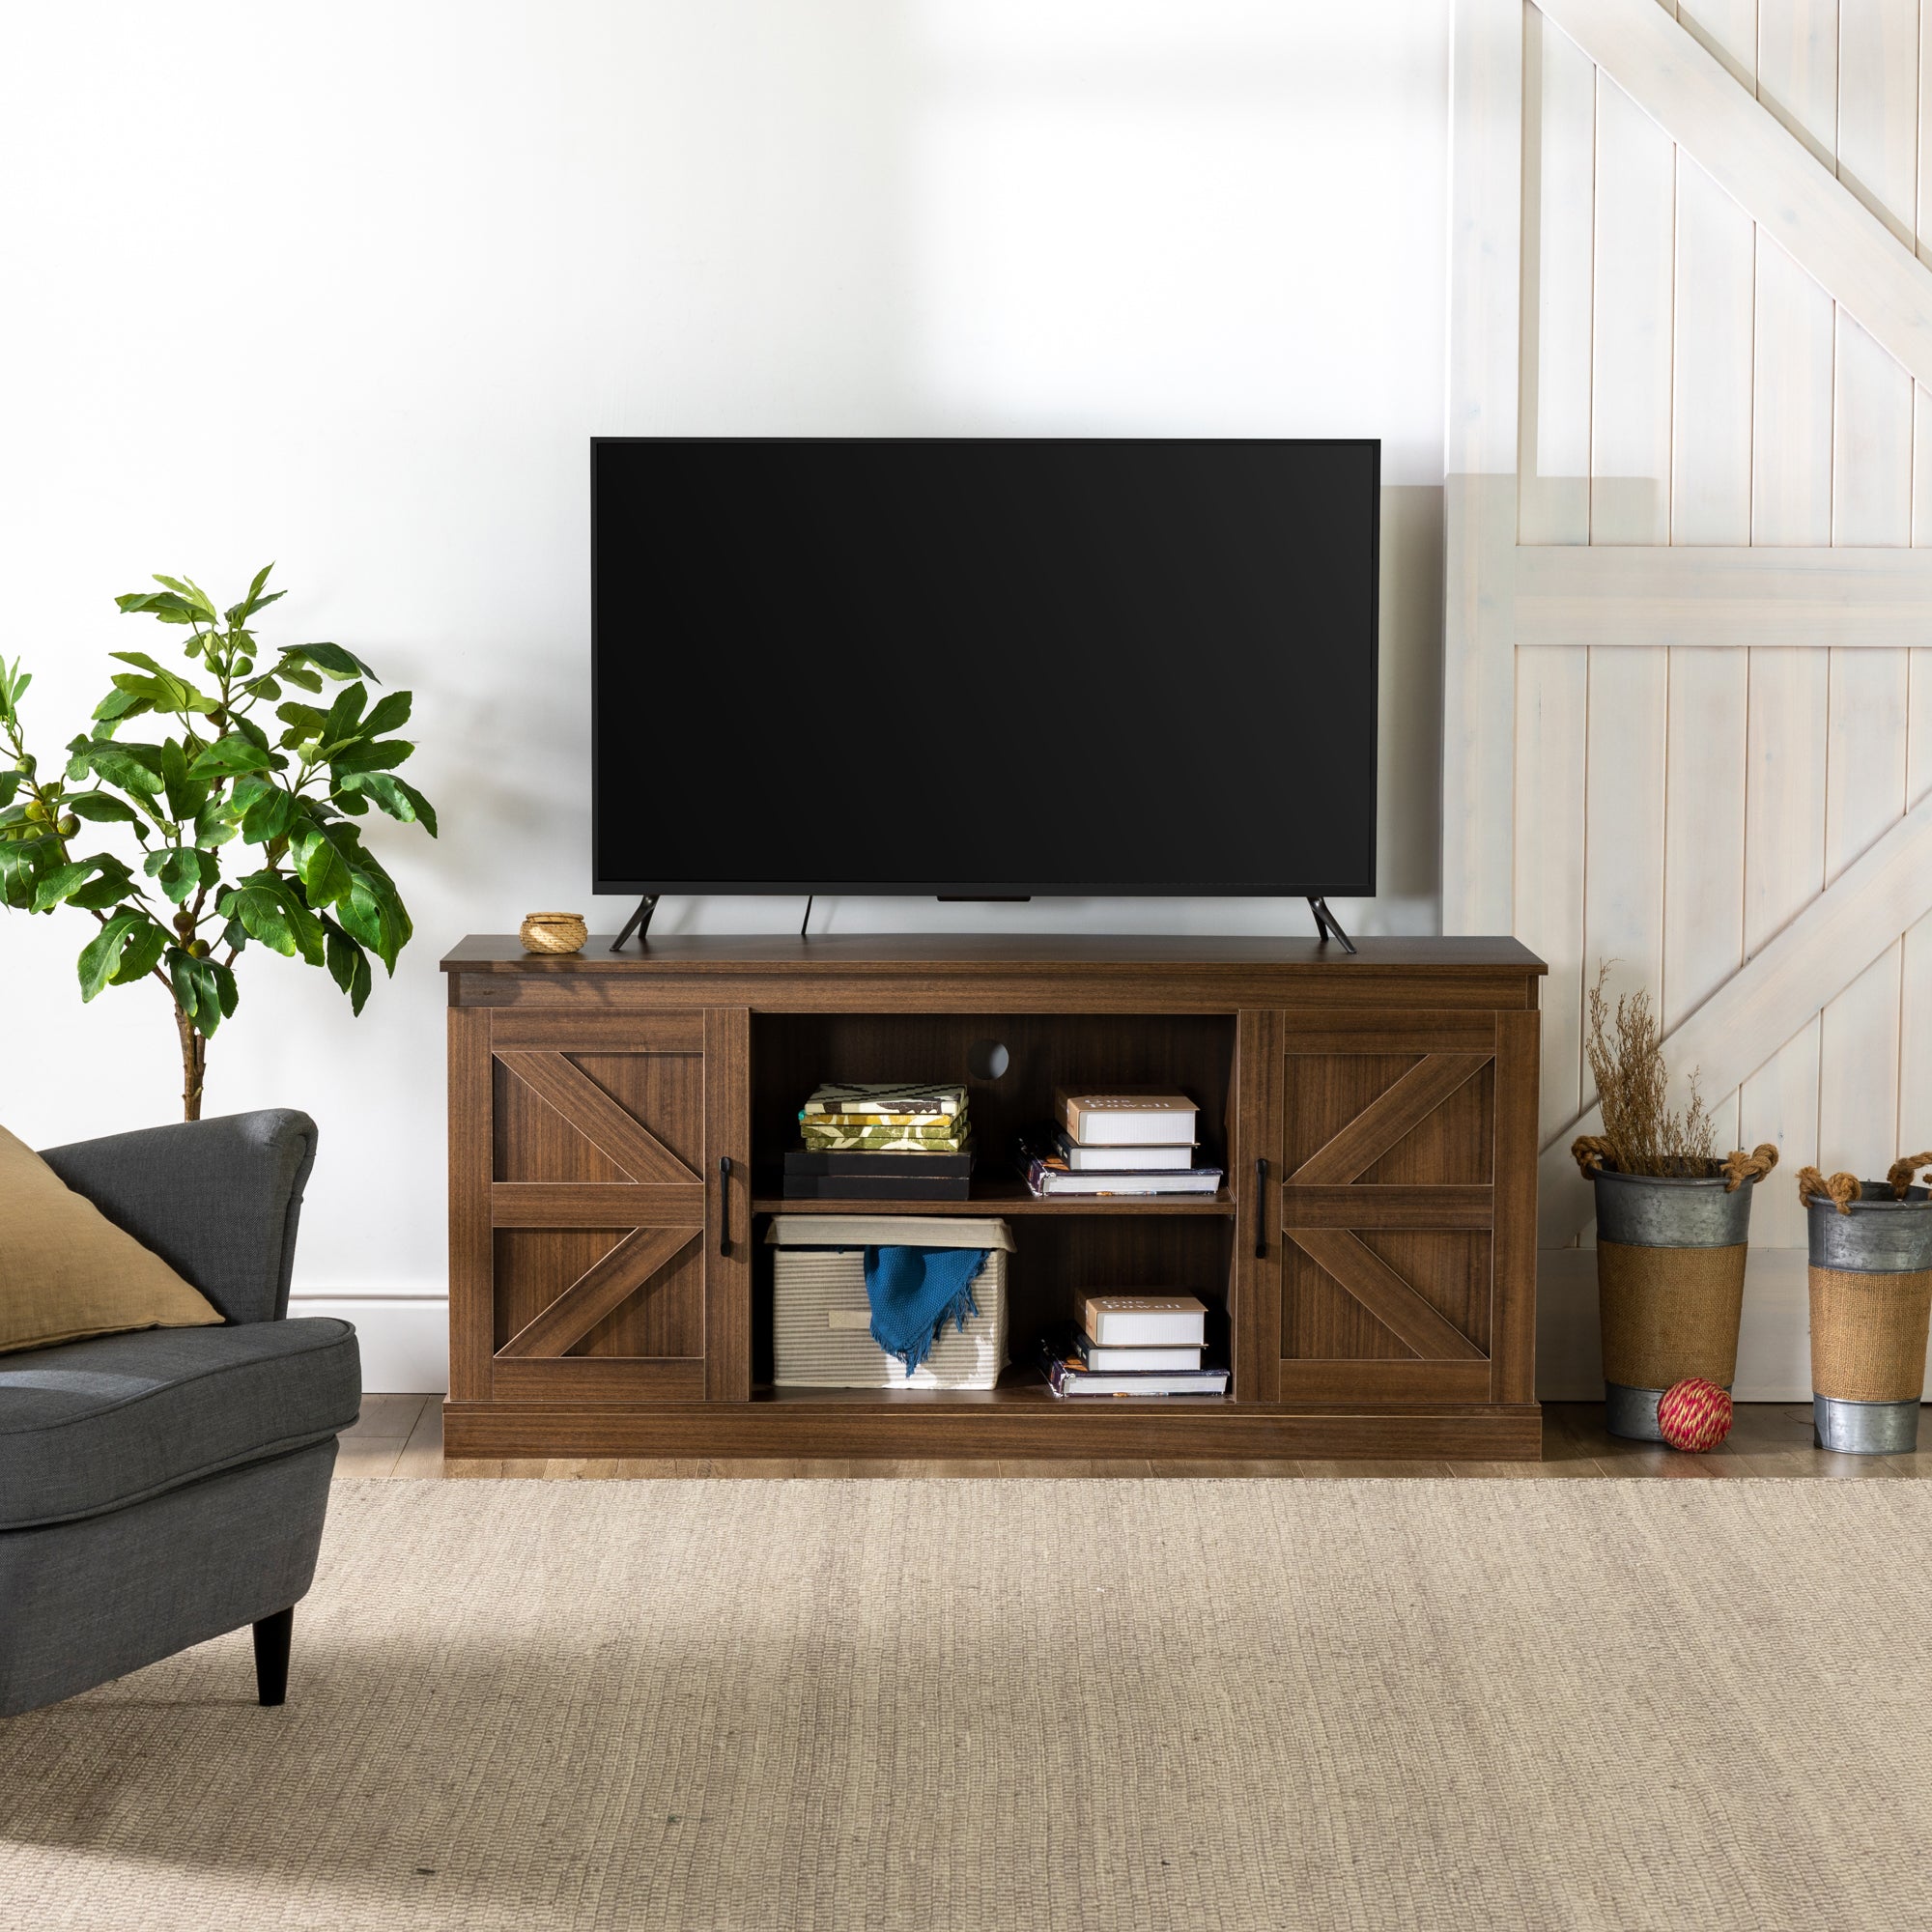 Wade TV Stand for TVs up to 65”